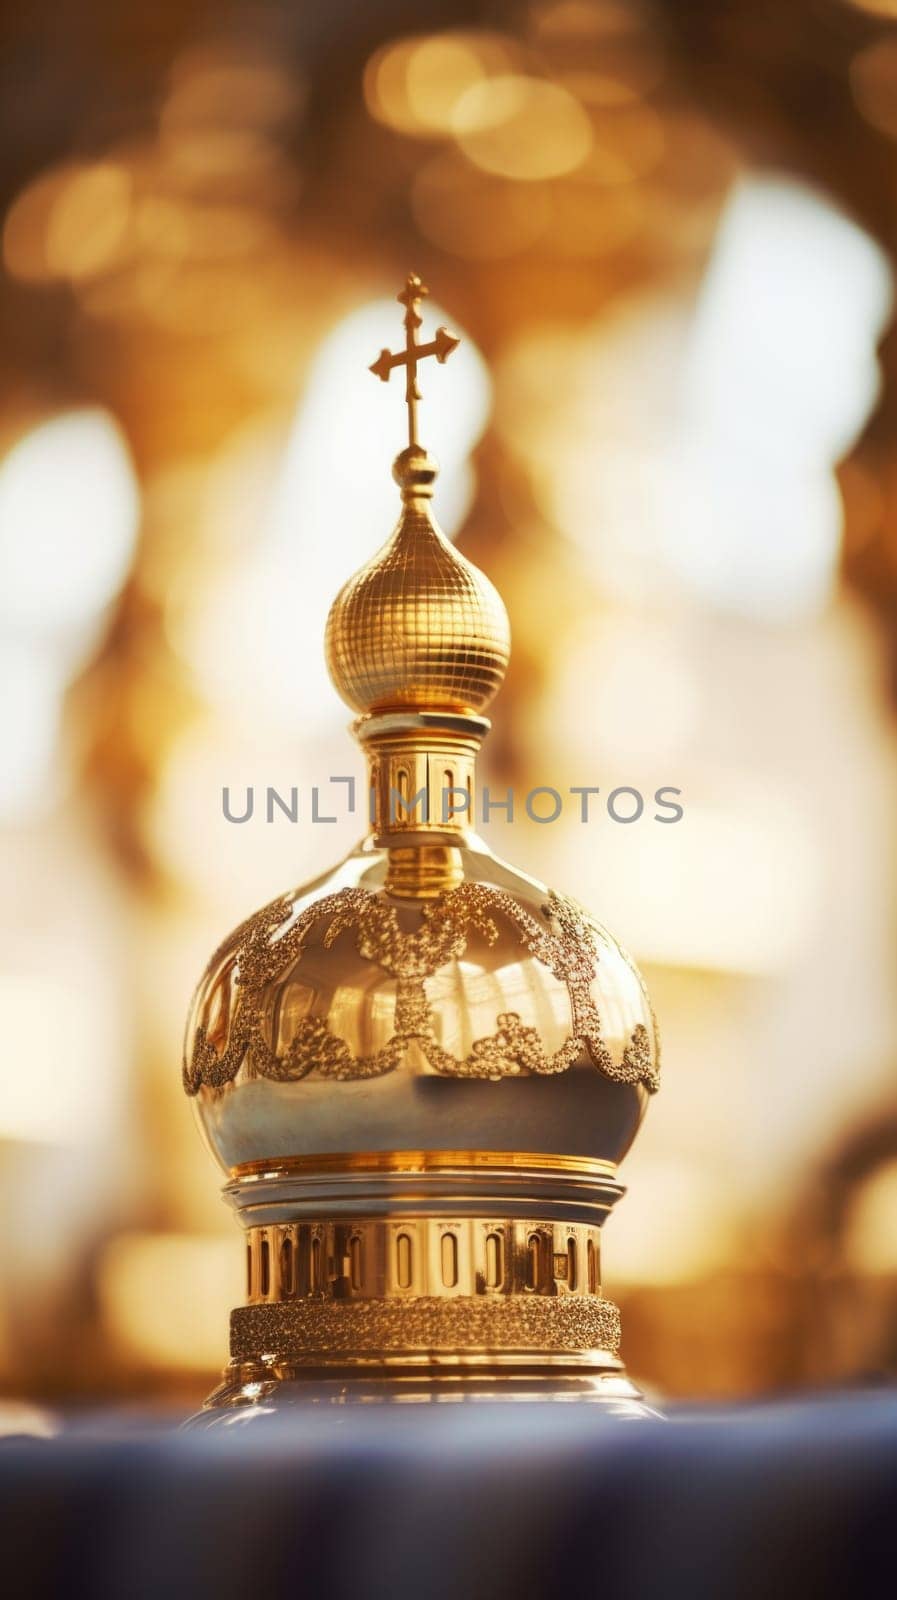 A golden dome on top of a table, AI by starush